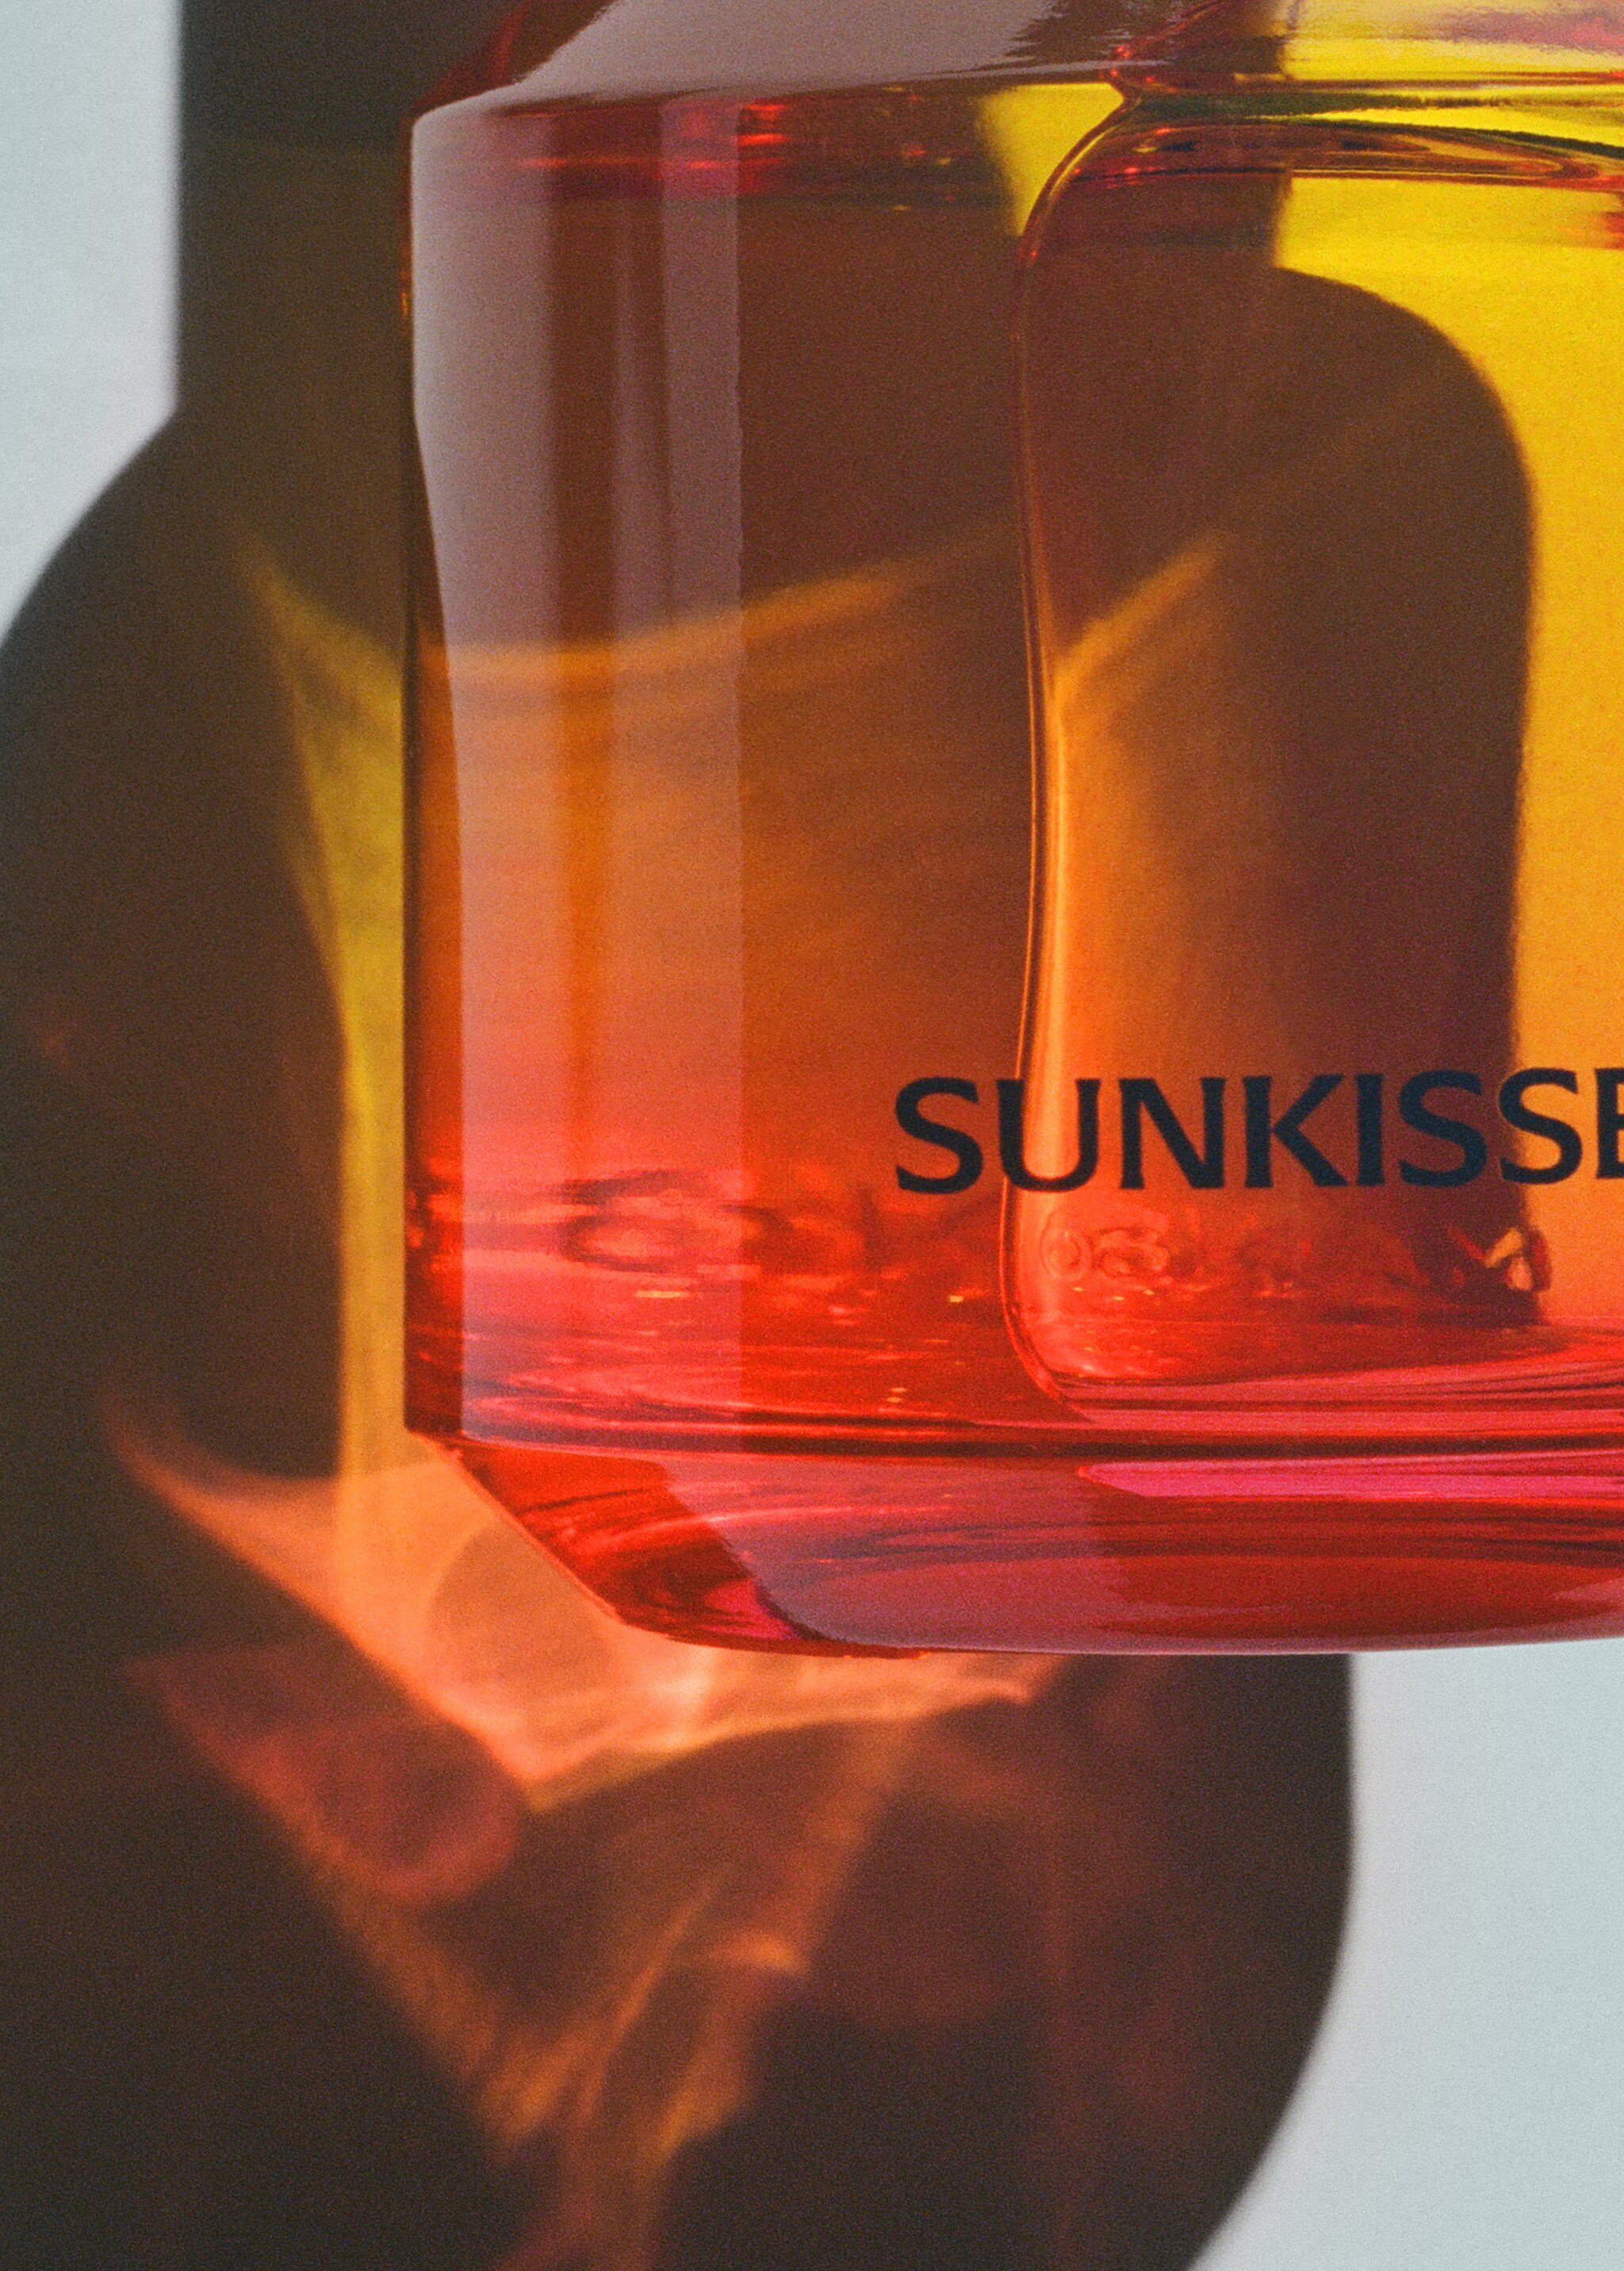 Sunkissed Fragrance 100ml - Details of the article 2